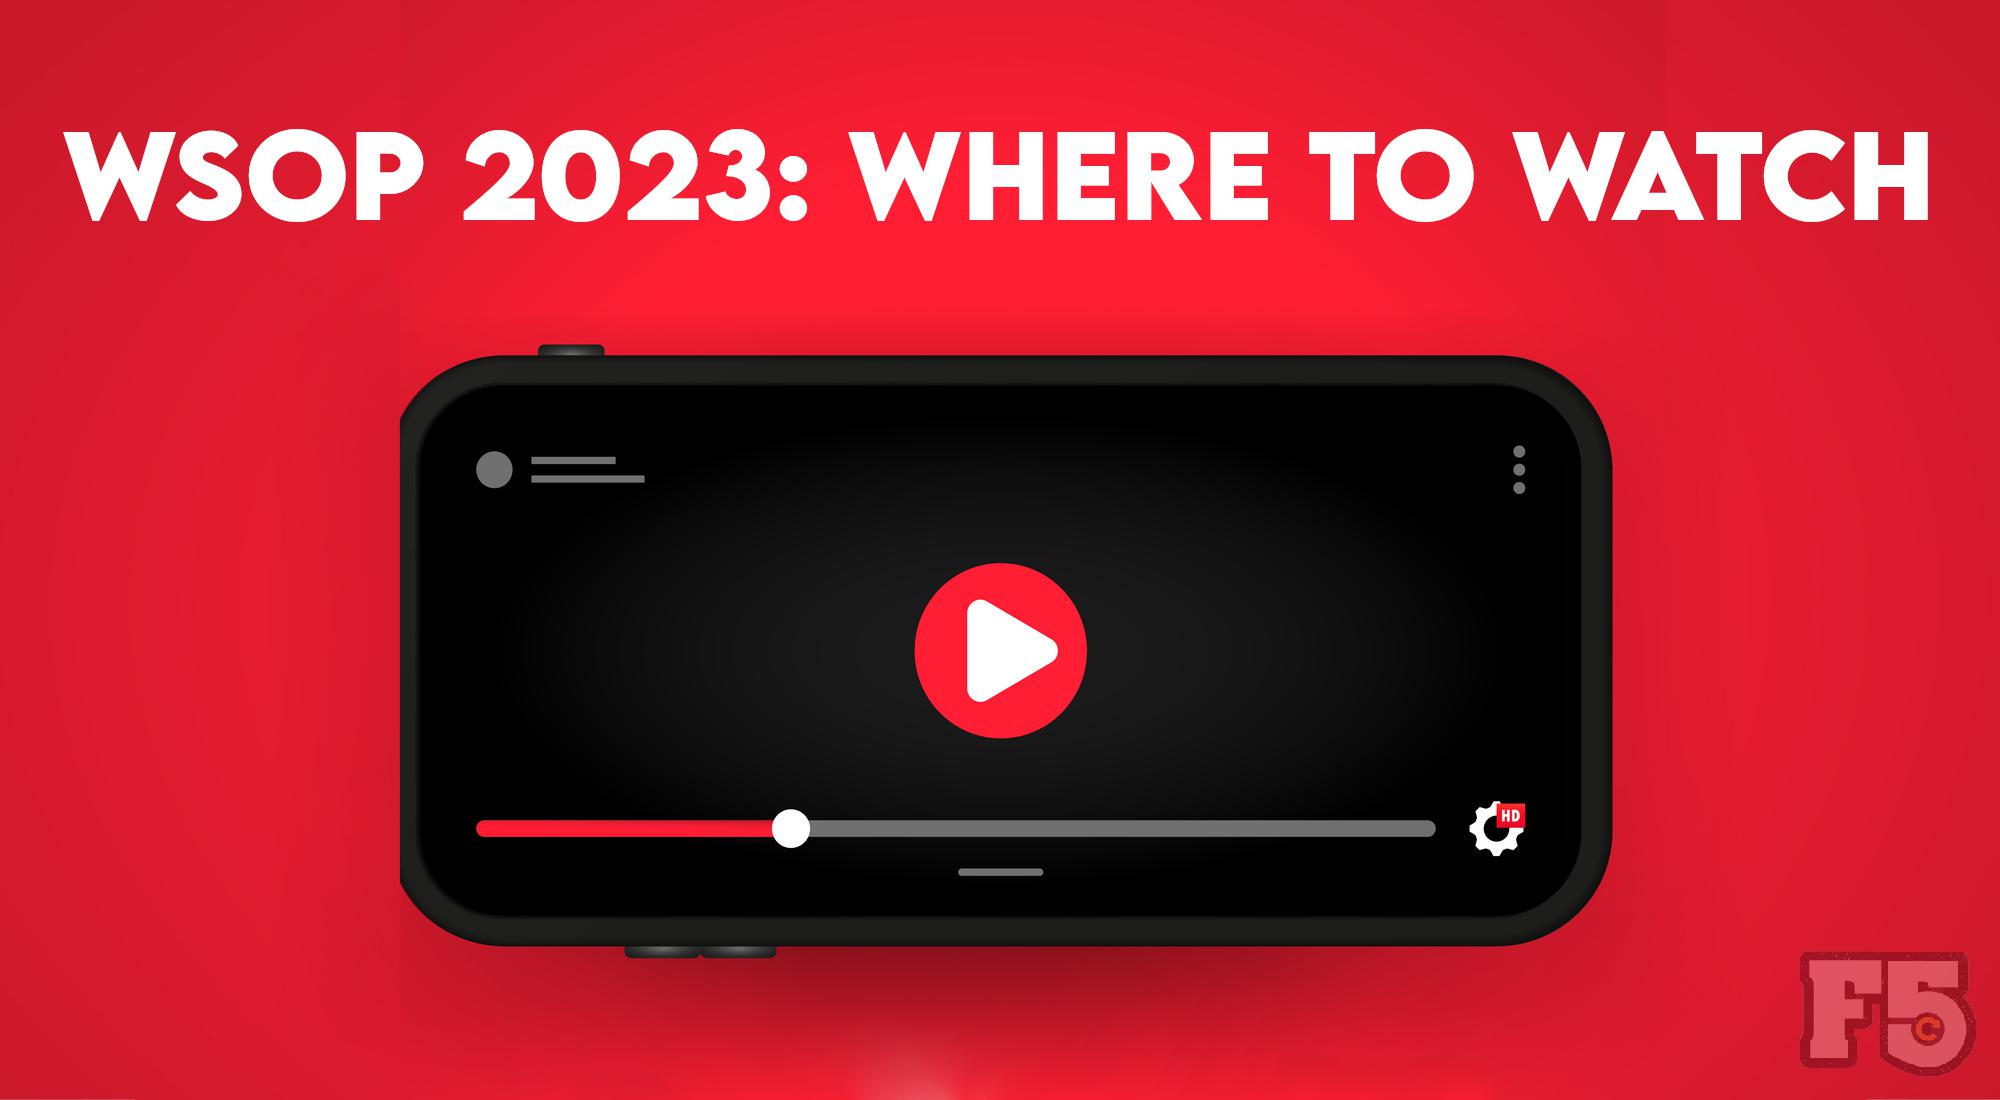 an illustration of a cell phone with youtube or other video streaming service. text above reads: WSOP 2023: Where To Watch